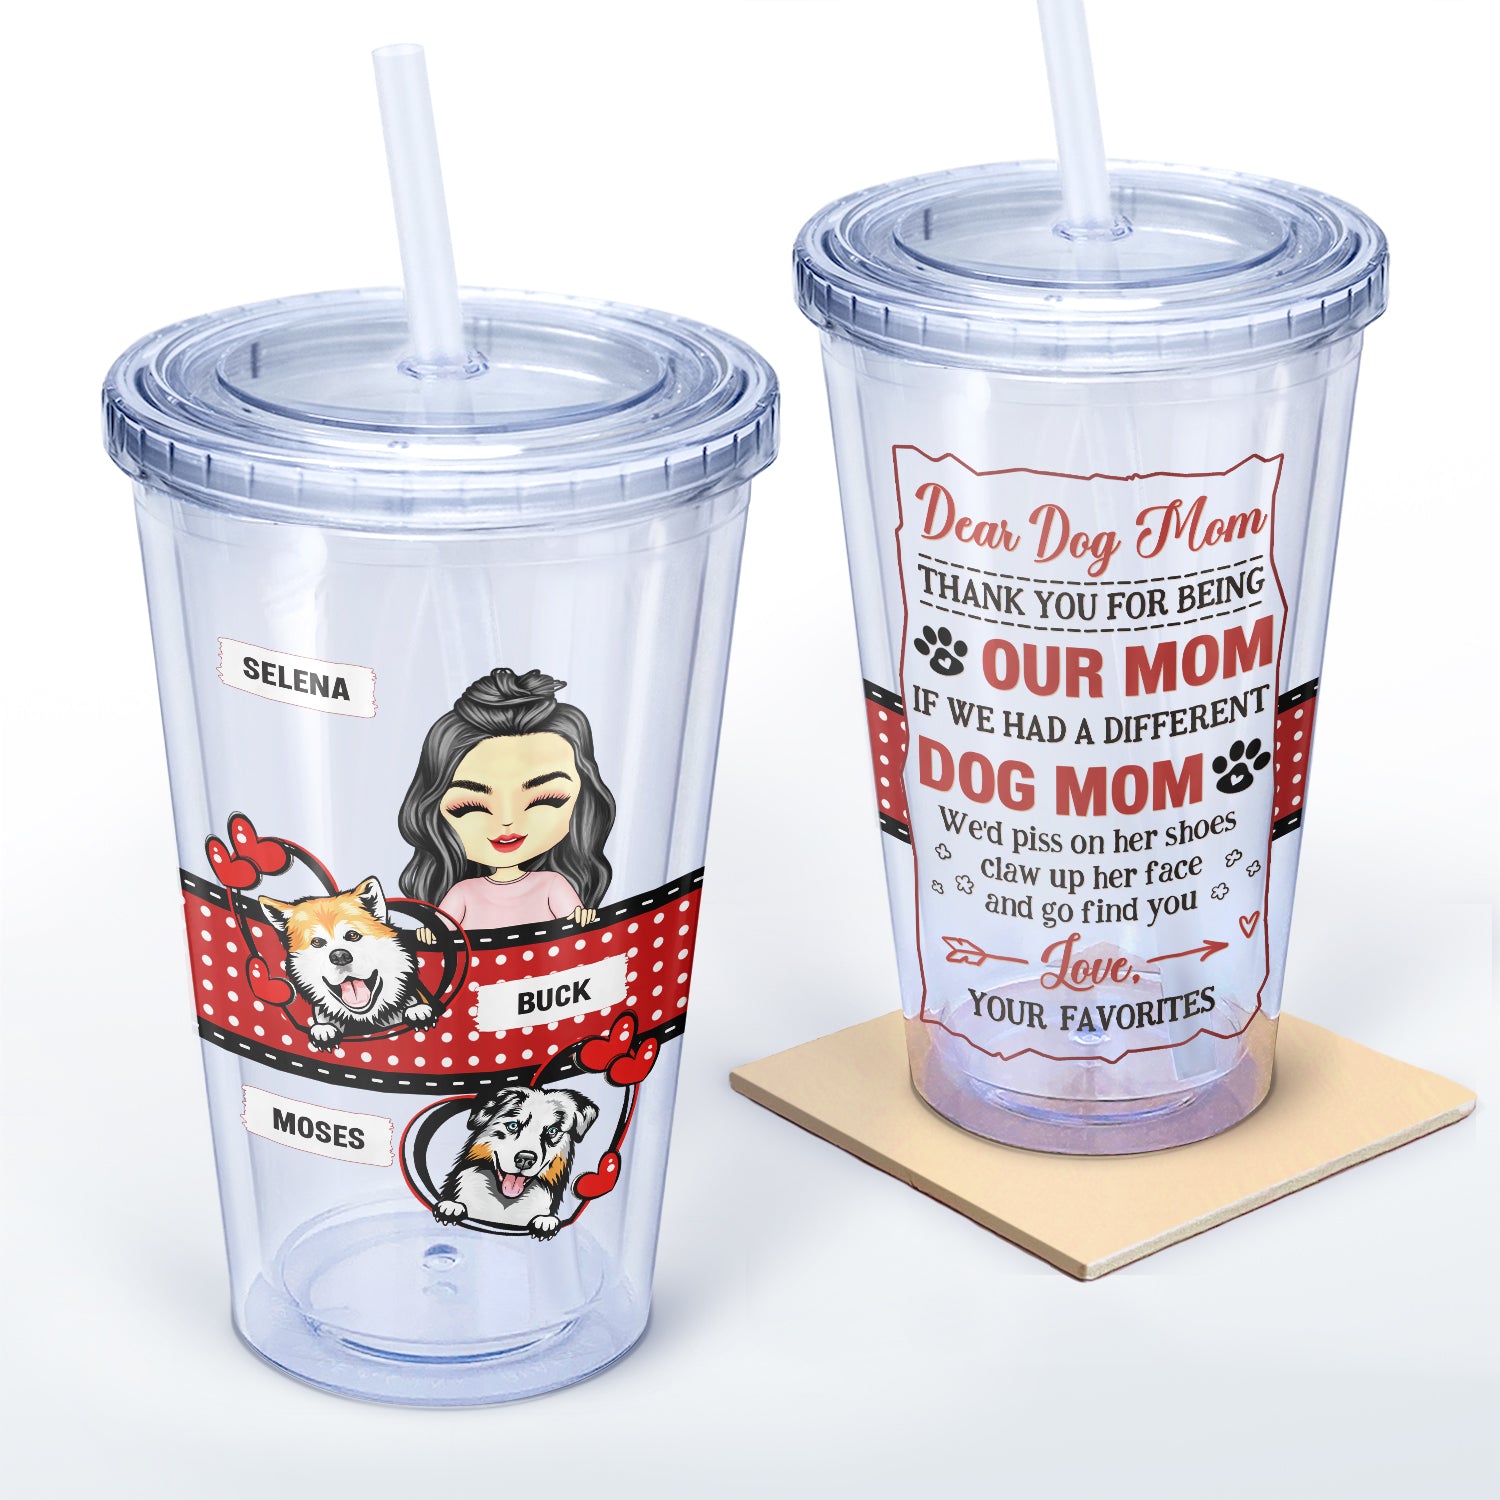 Dear Dog Mom Thank You For Being Our Mom - Gift For Dog Lovers - Personalized Acrylic Insulated Tumbler With Straw